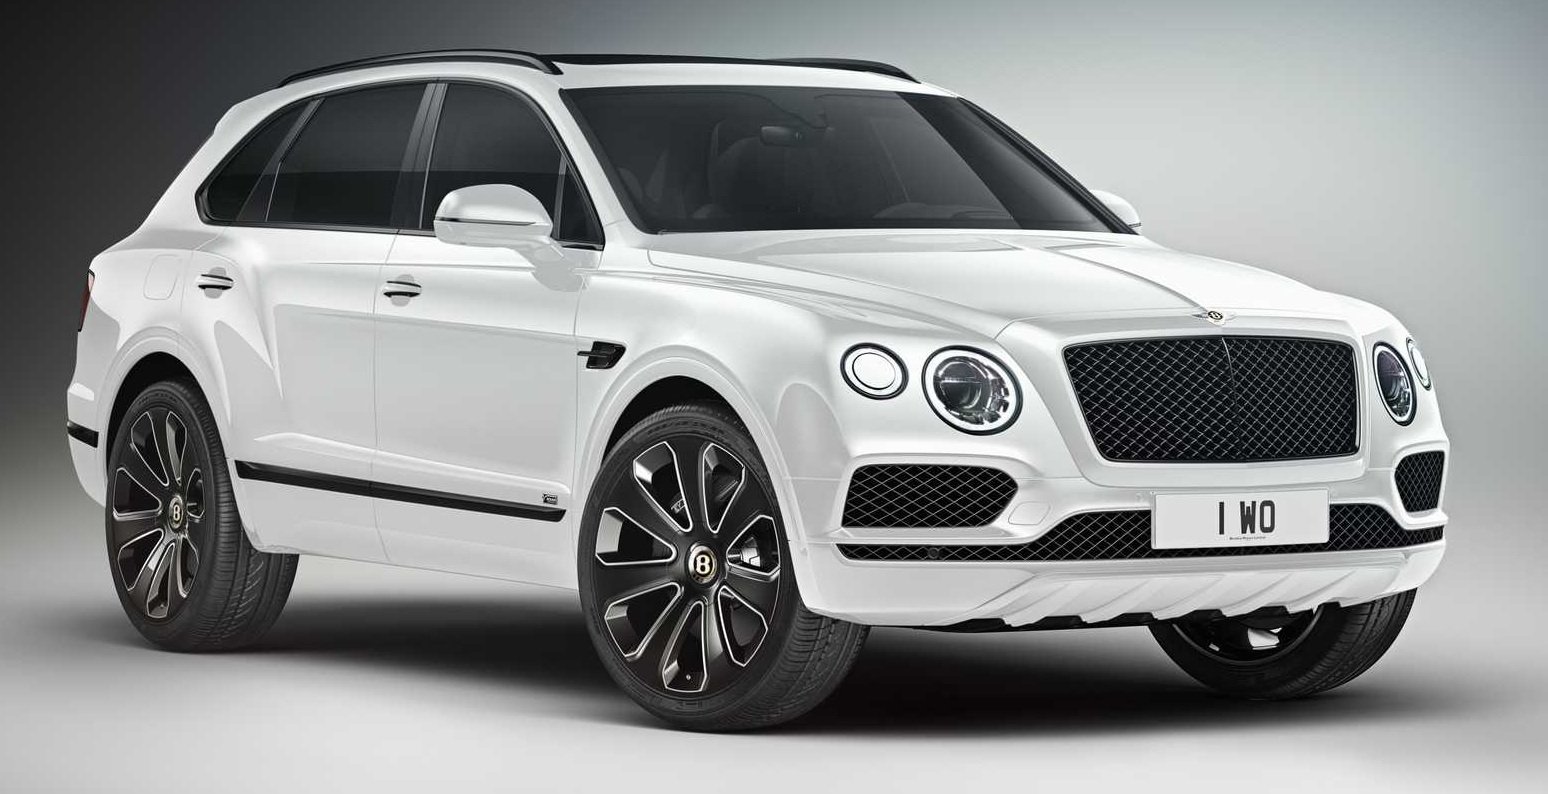 15 Most Expensive Cars in India - Bentley Bentayga